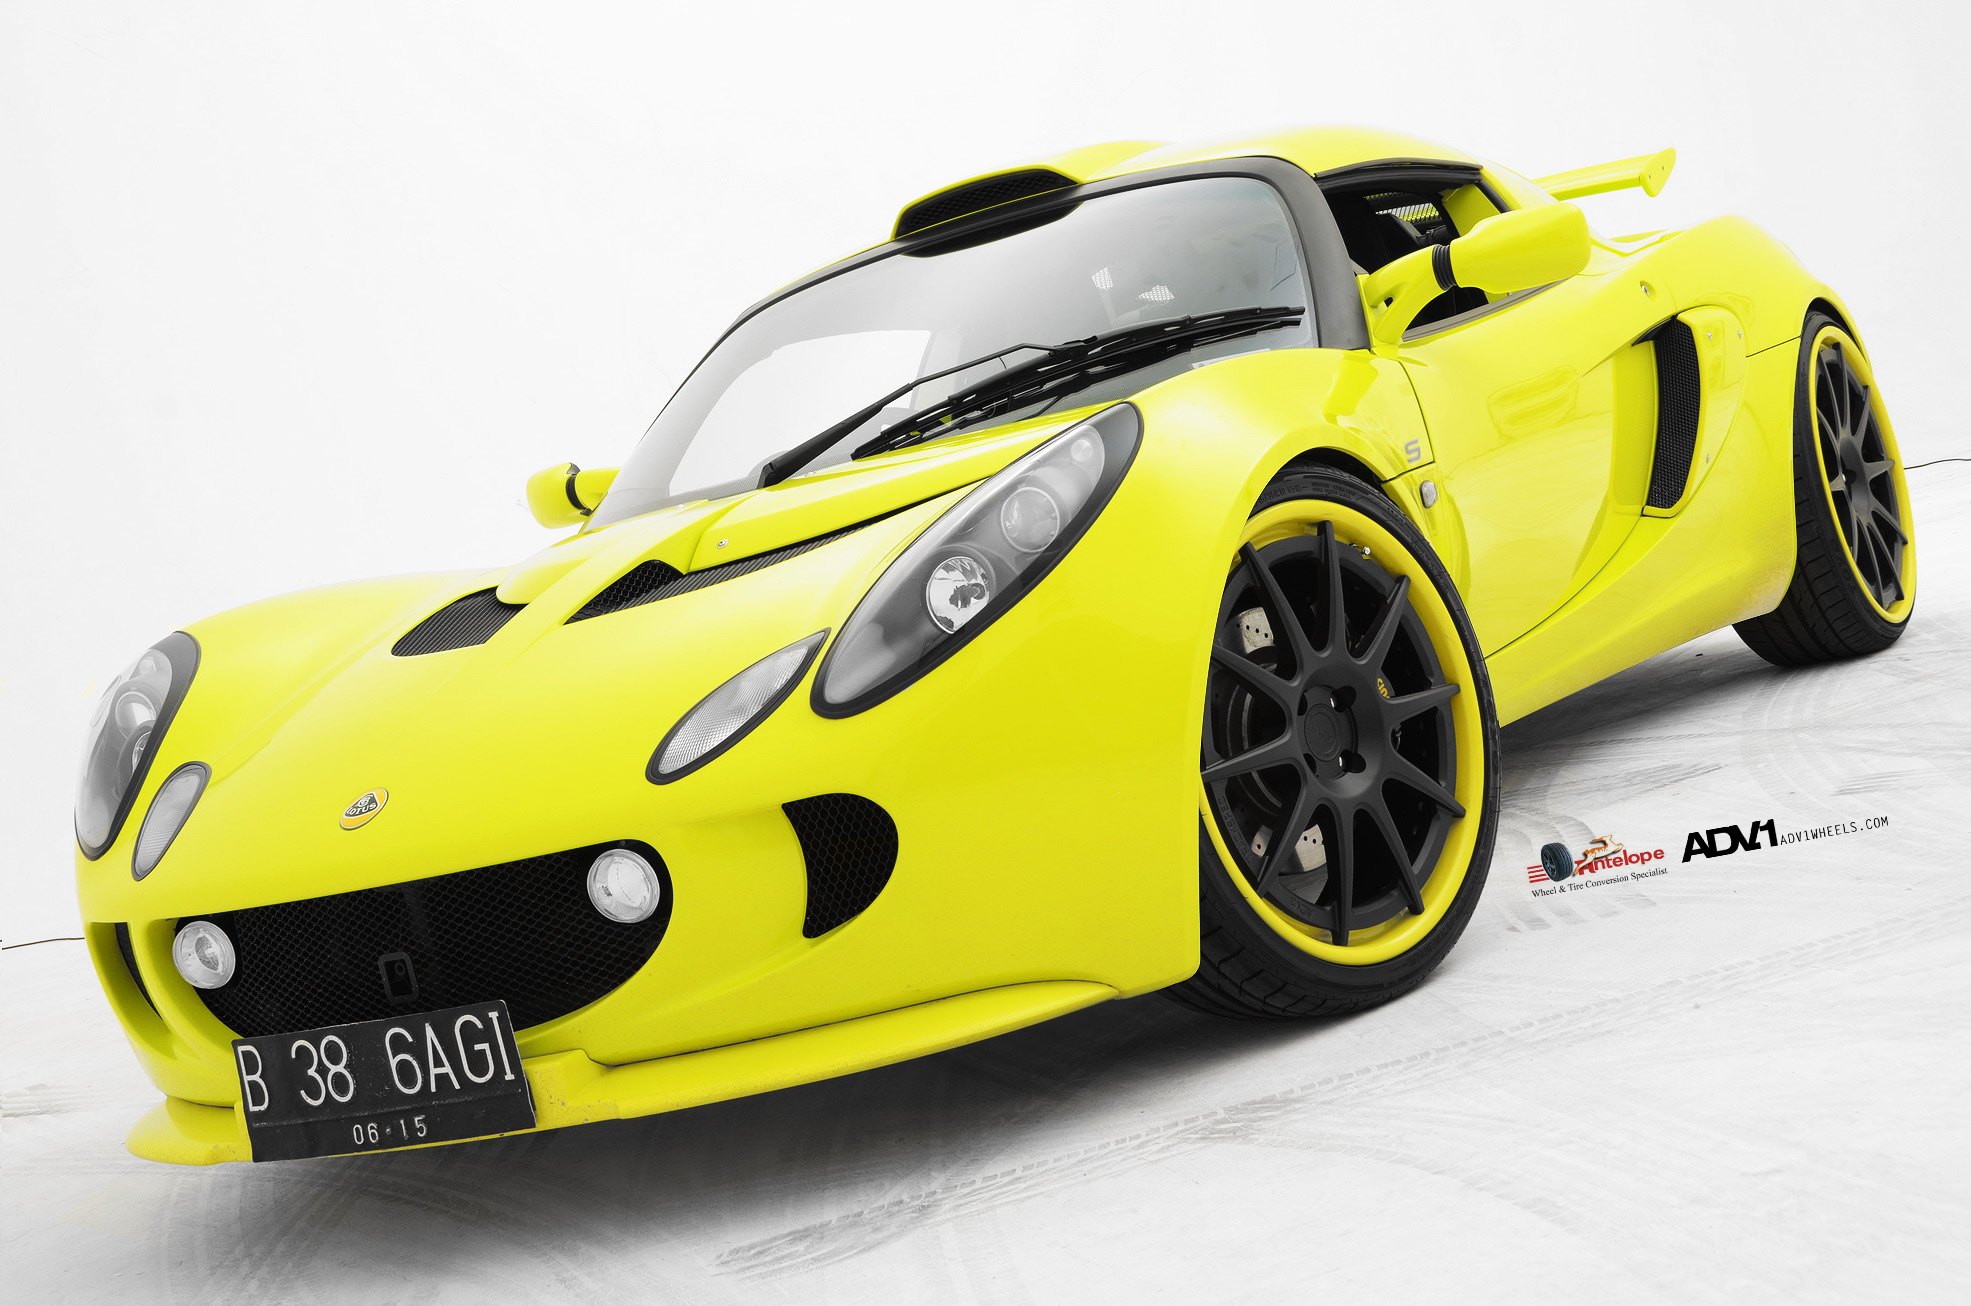 Lime Green Lotus Exige with Custom Body Kit - Photo by ADV.1